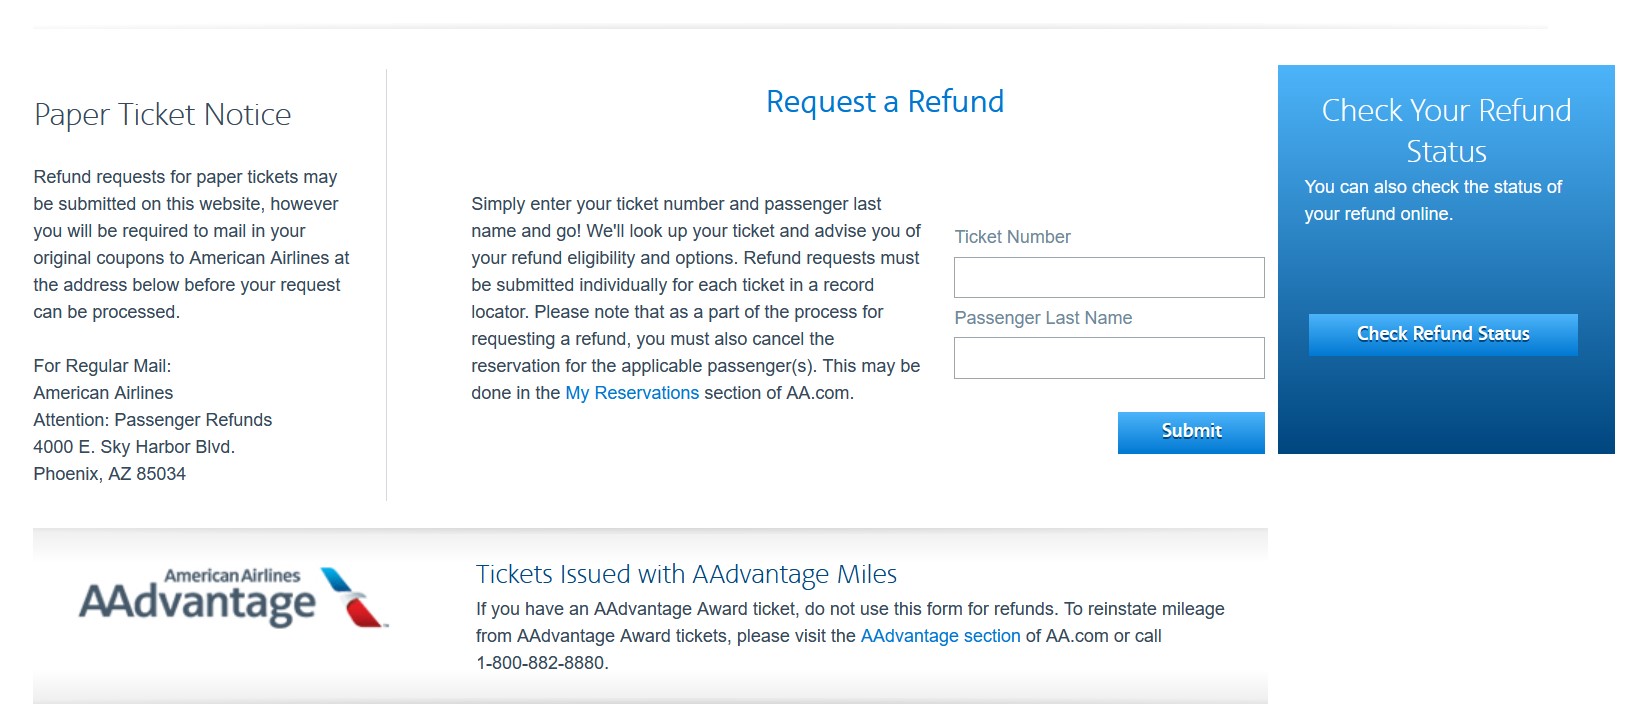 american-airlines-cancellation-policy-fee-can-i-get-a-refund